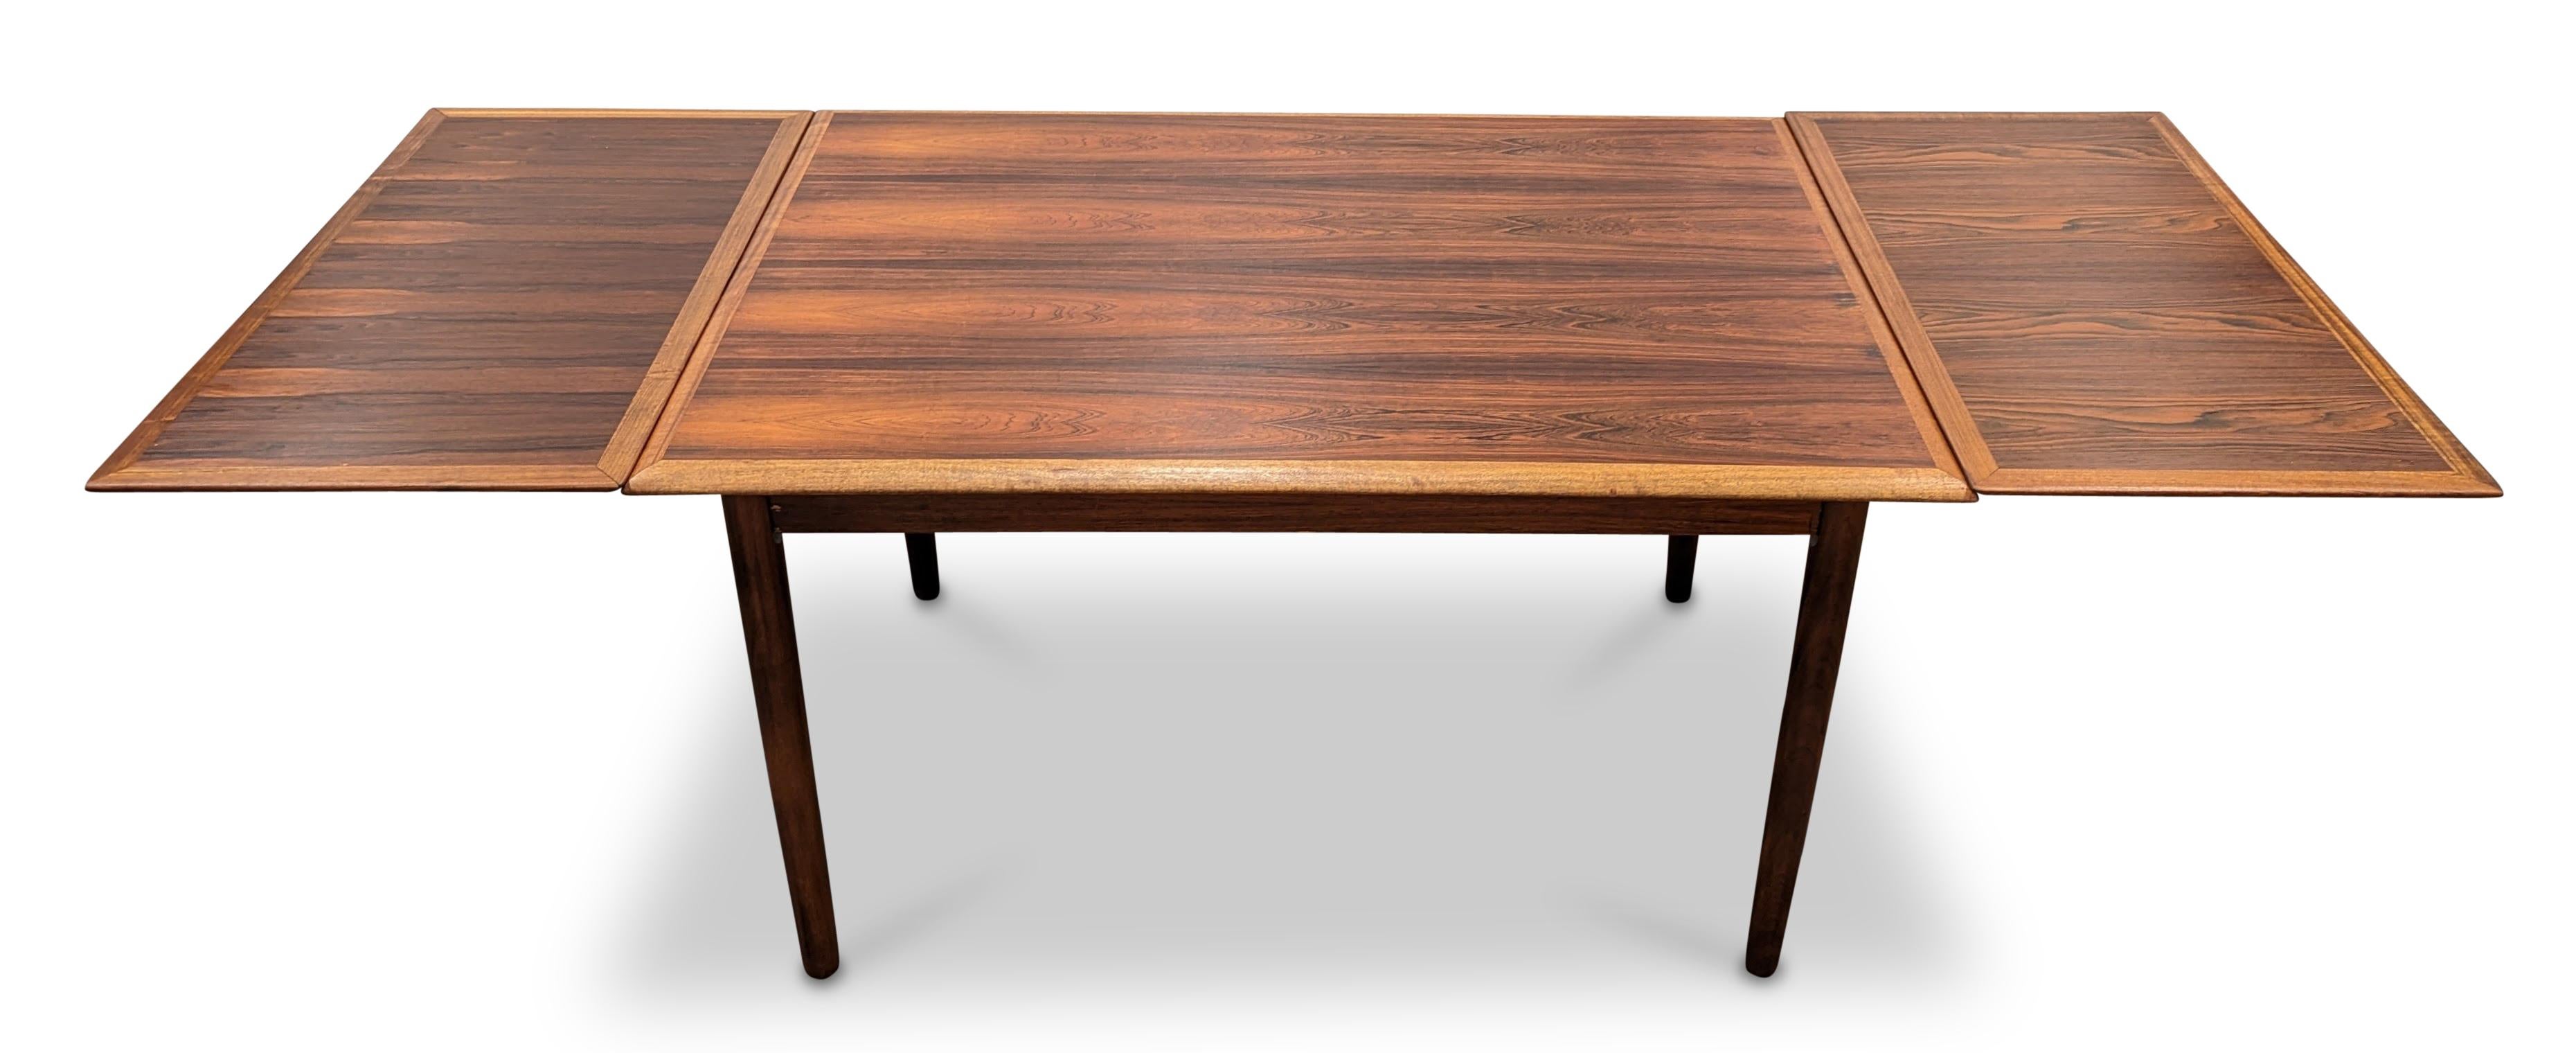 Vintage Danish Rosewood Dining Table W Two Leaves, 112209 2